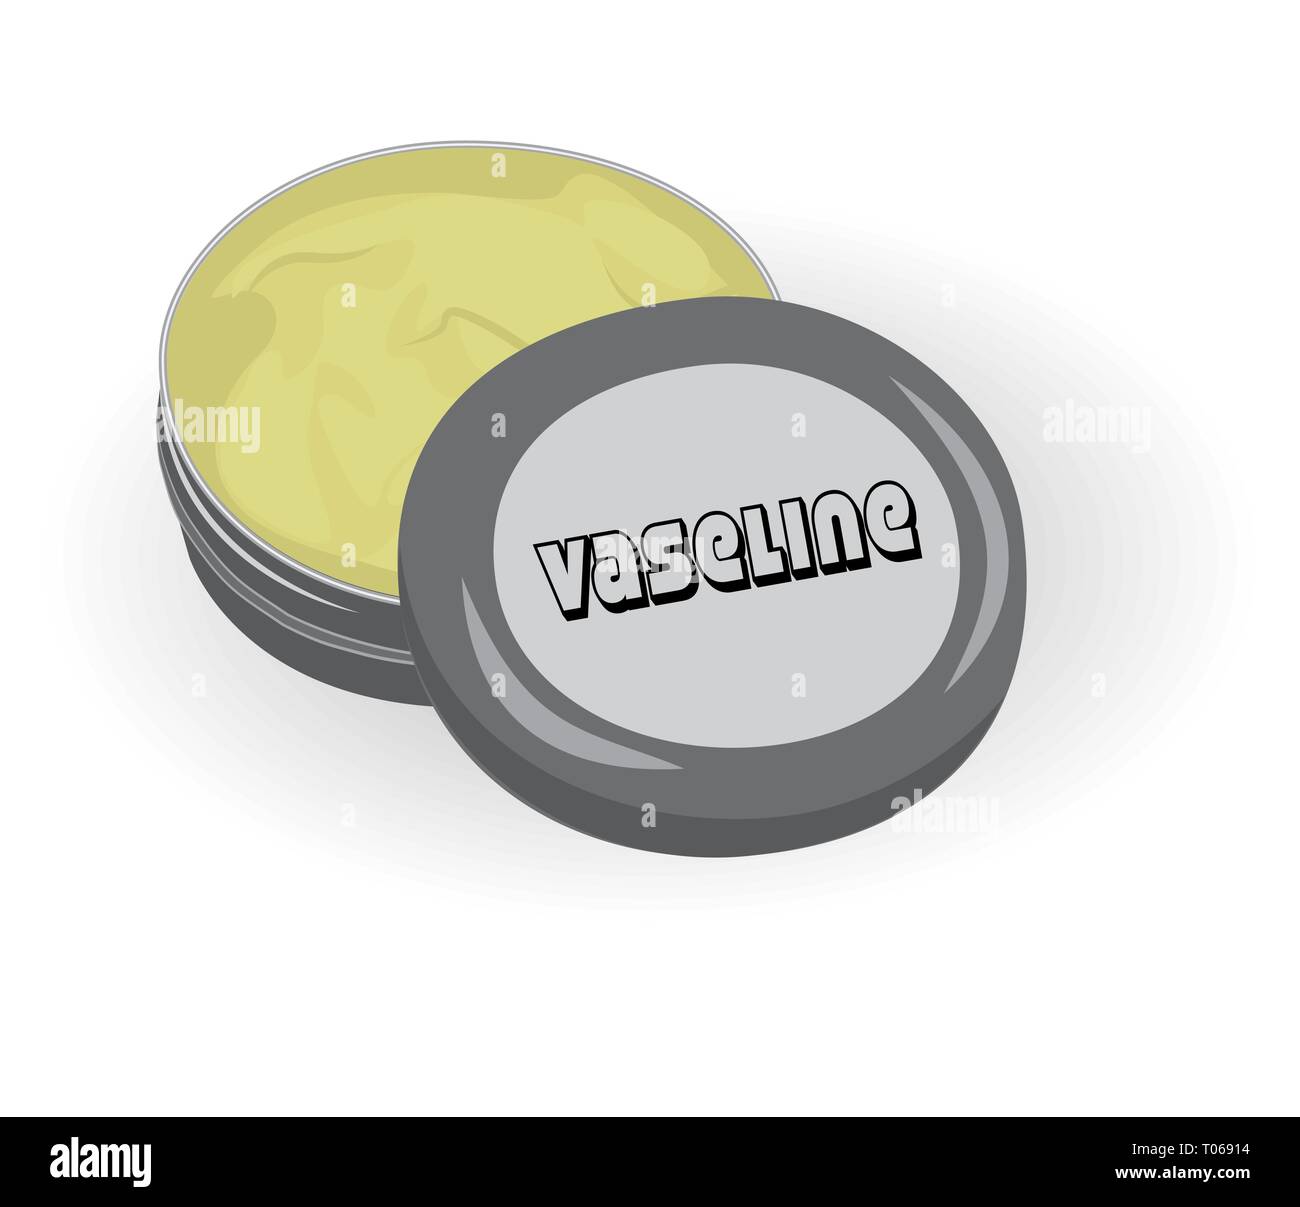 Vaseline petroleum for cosmetic use vector illustration on a white background isolated Stock Vector